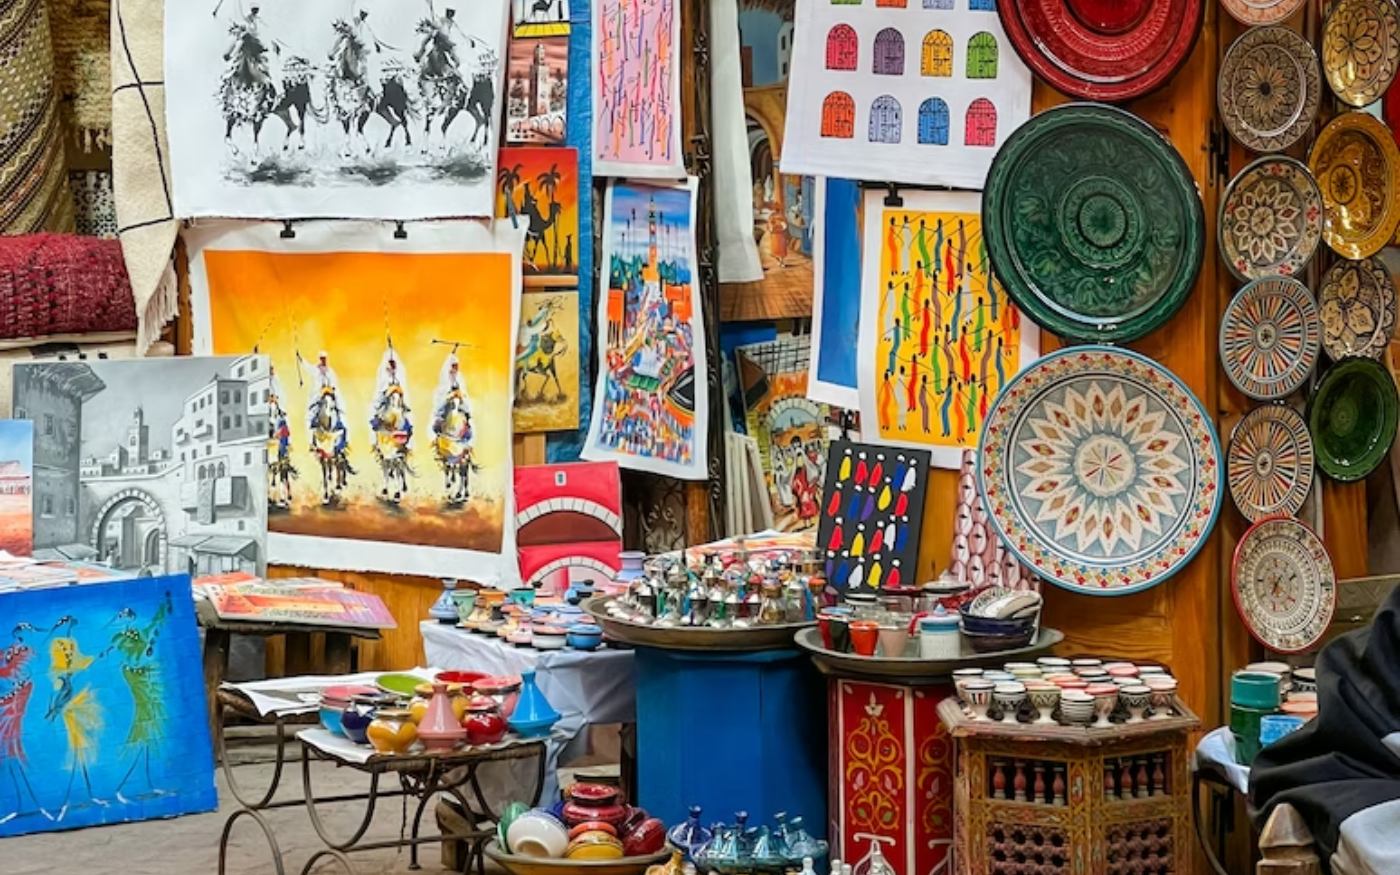 art and other home goods at the souks in Marrakech Morocco